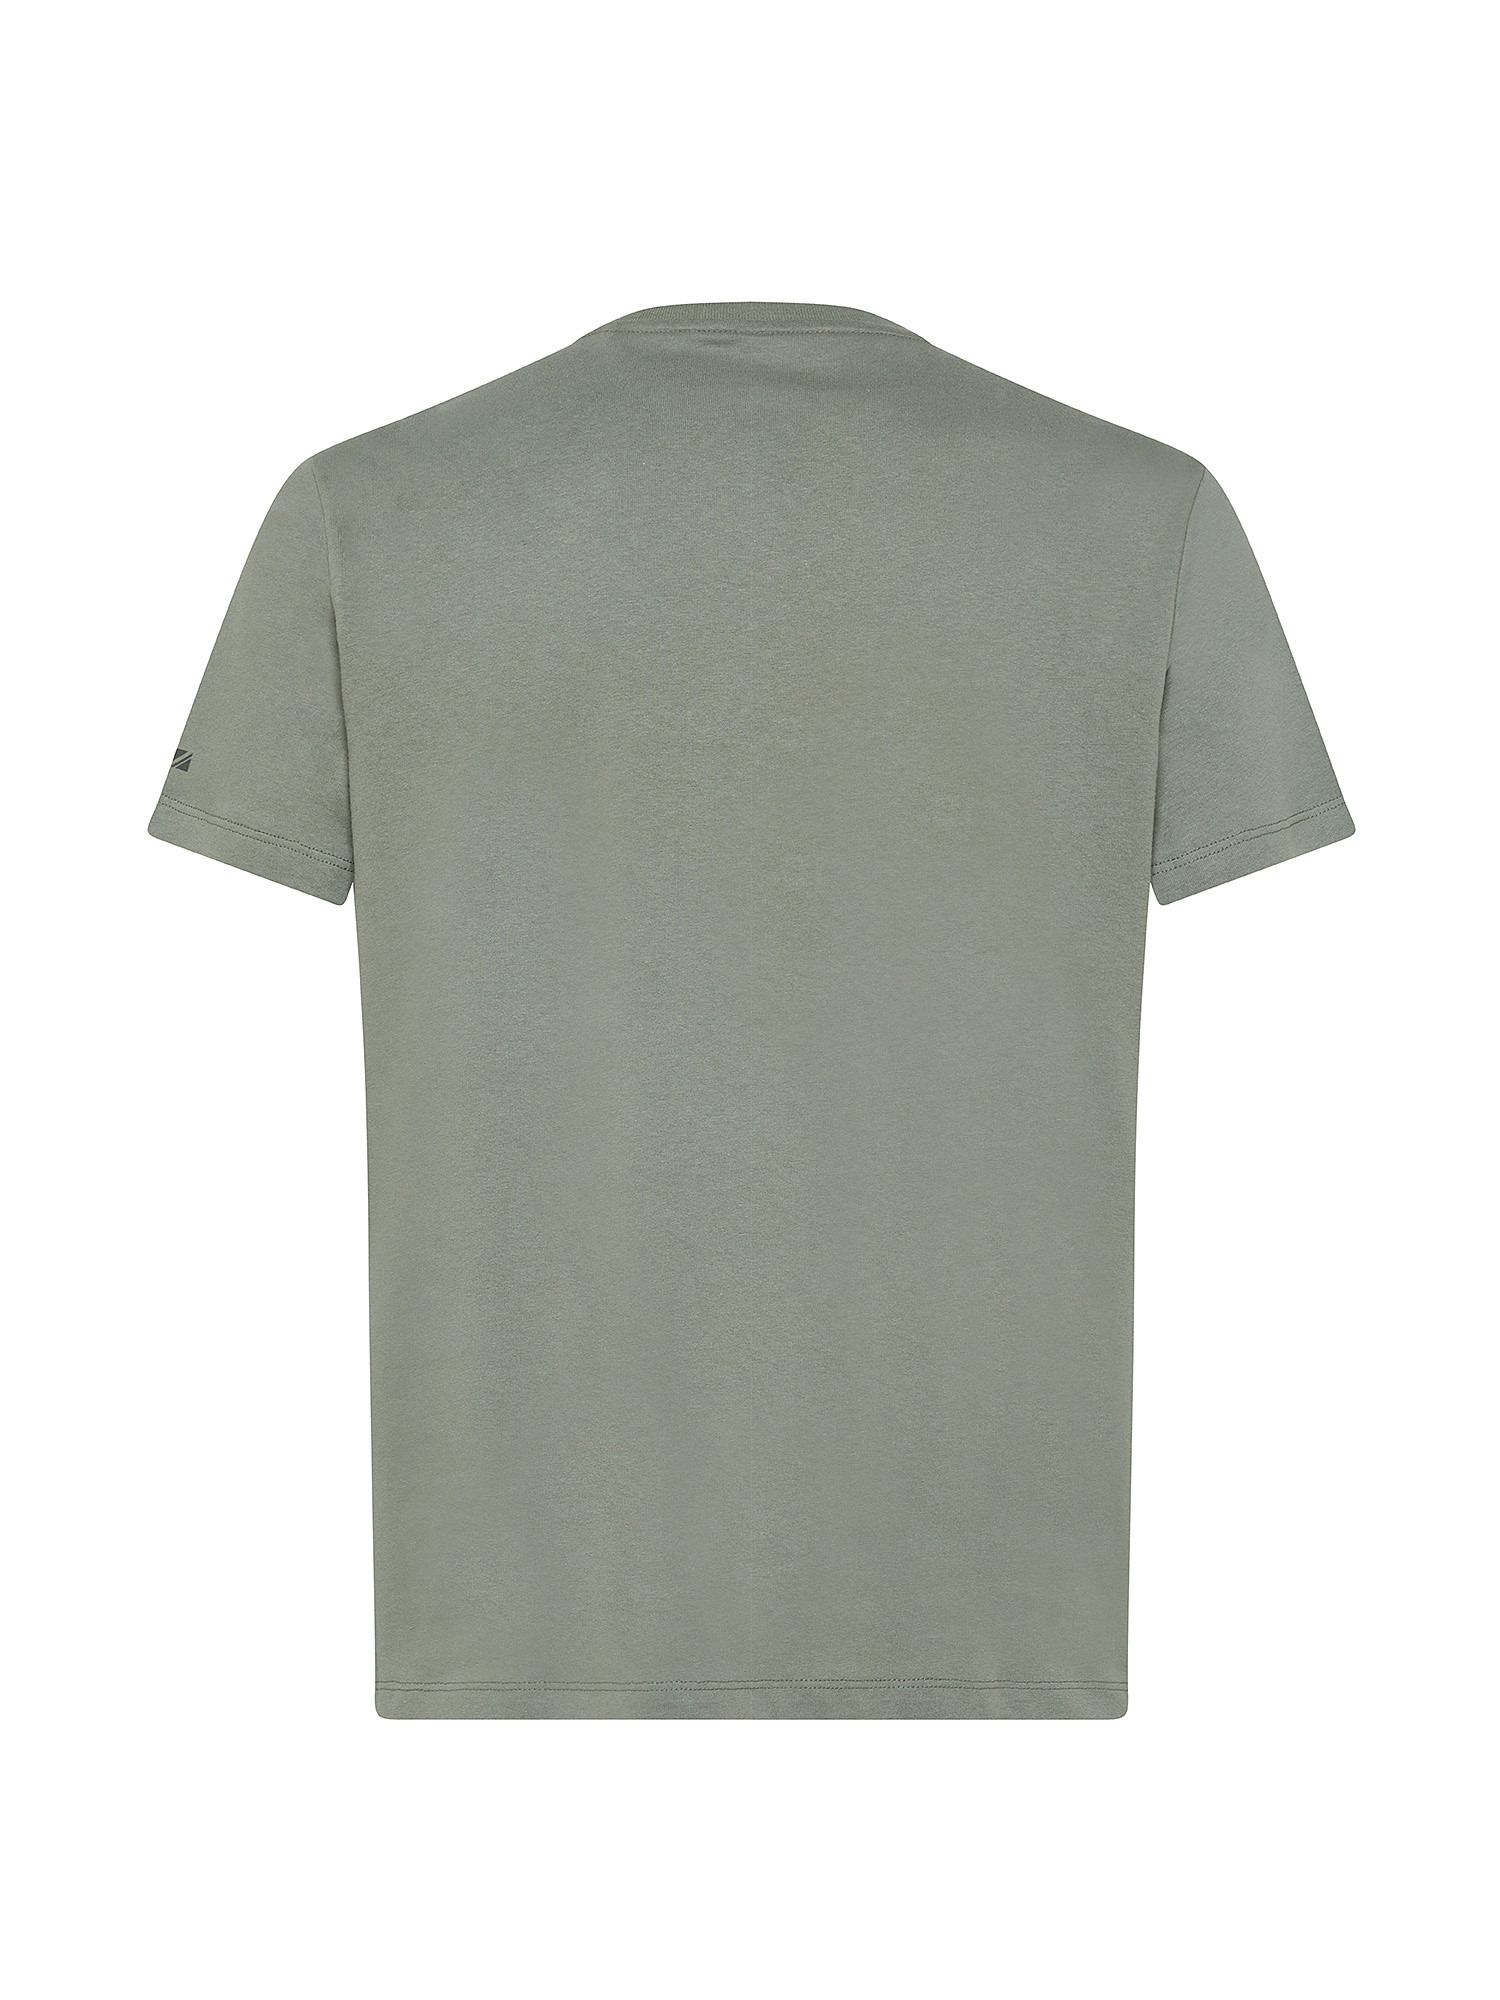 Pepe Jeans - T-shirt con logo in cotone, Verde chiaro, large image number 1